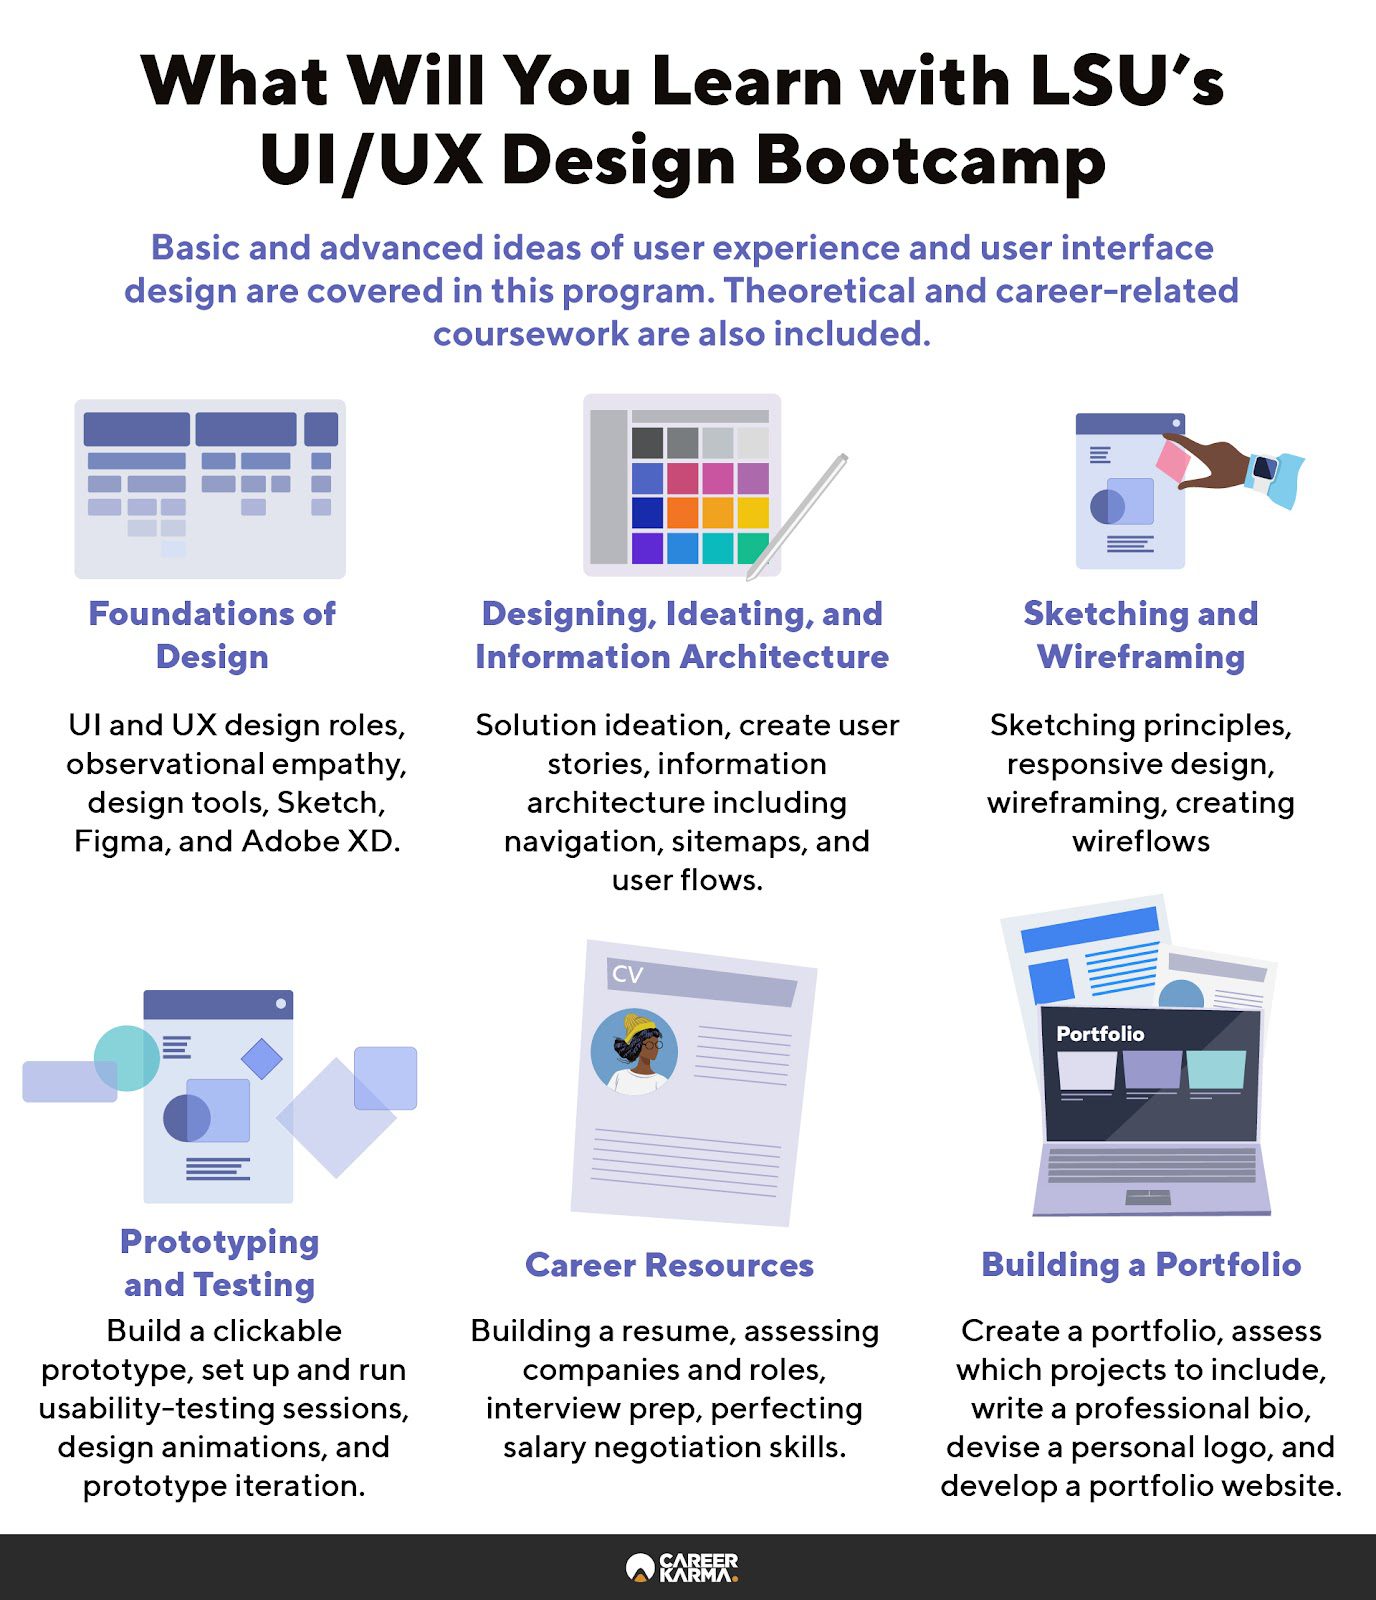 An infographic highlighting what students will learn at LSU’s UI/UX Design Bootcamp